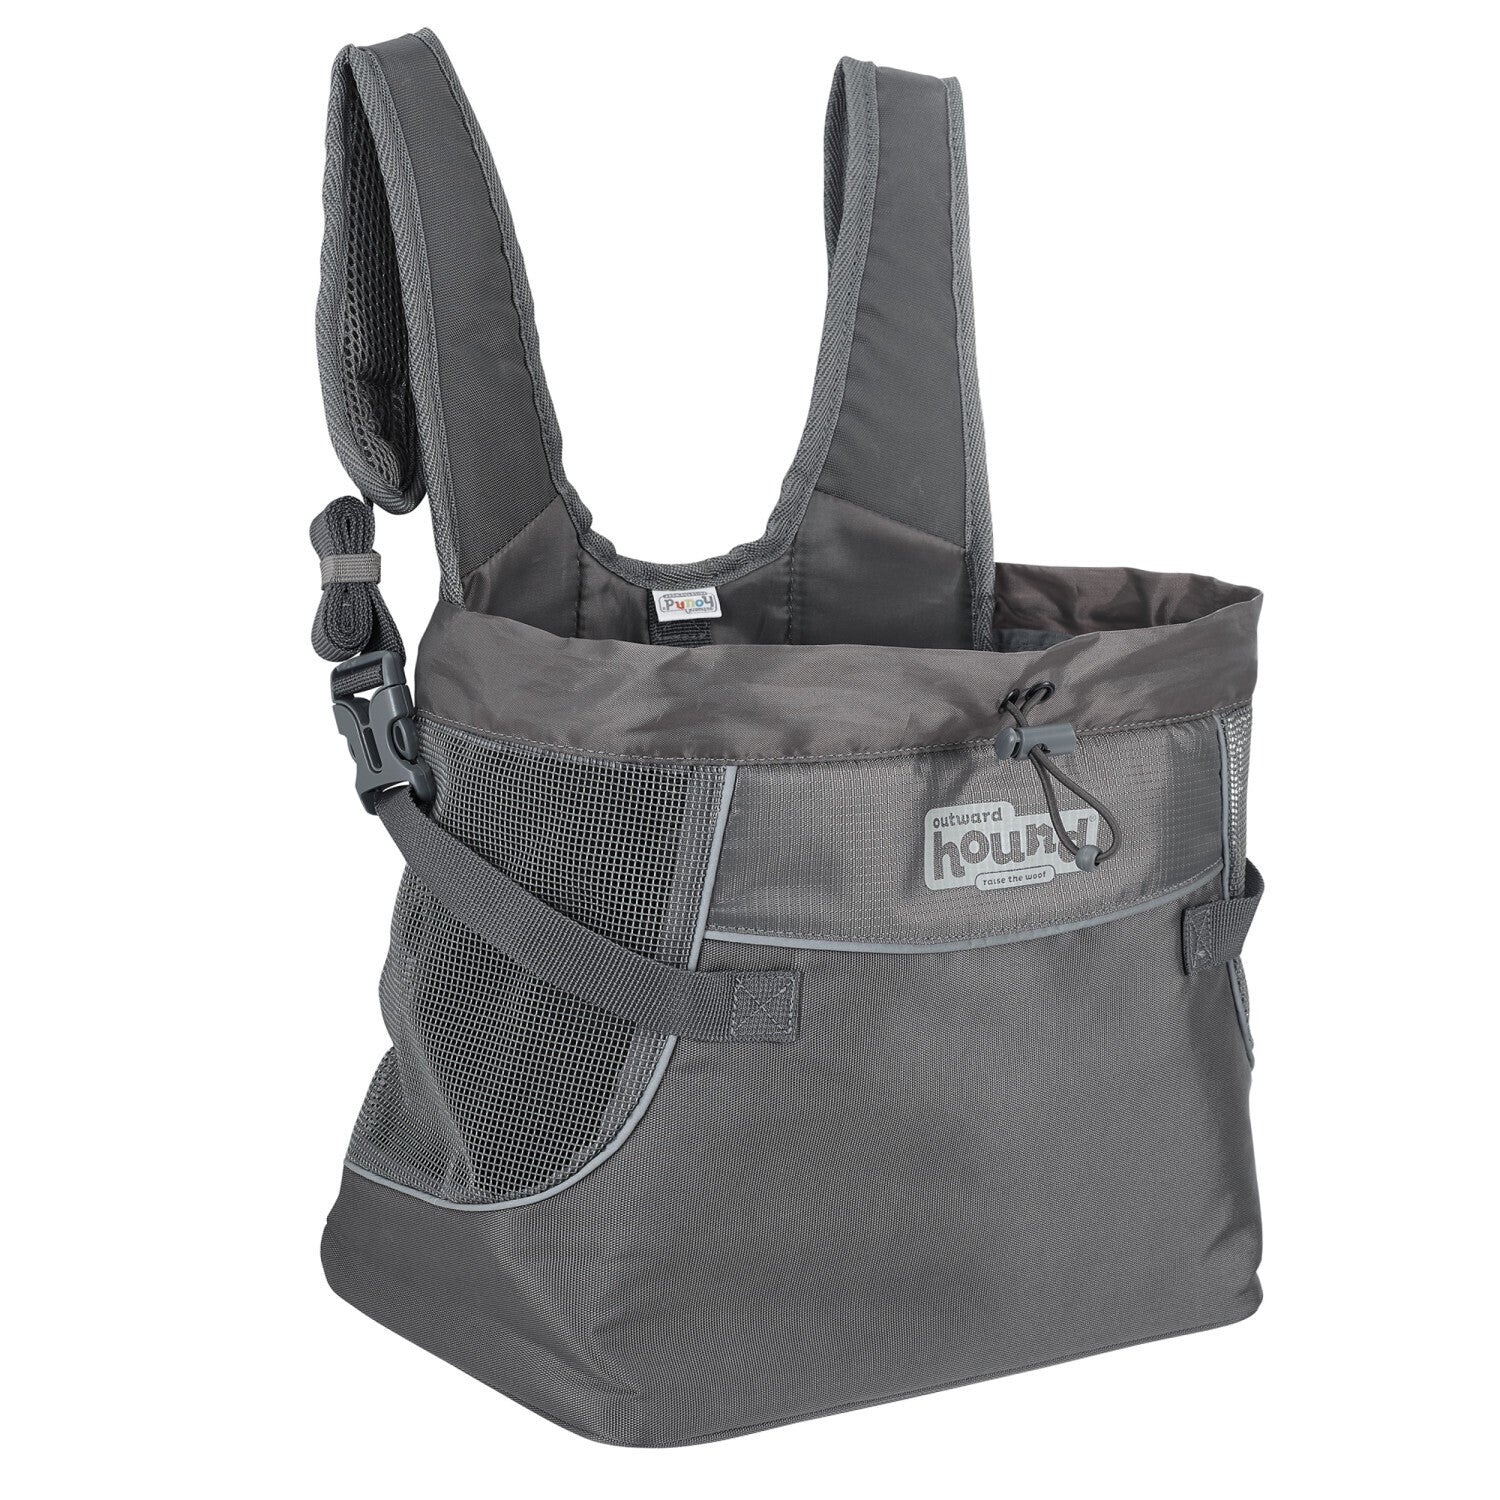 Outward Hound Puppak Front Dog Carrier Bag - Pets and More